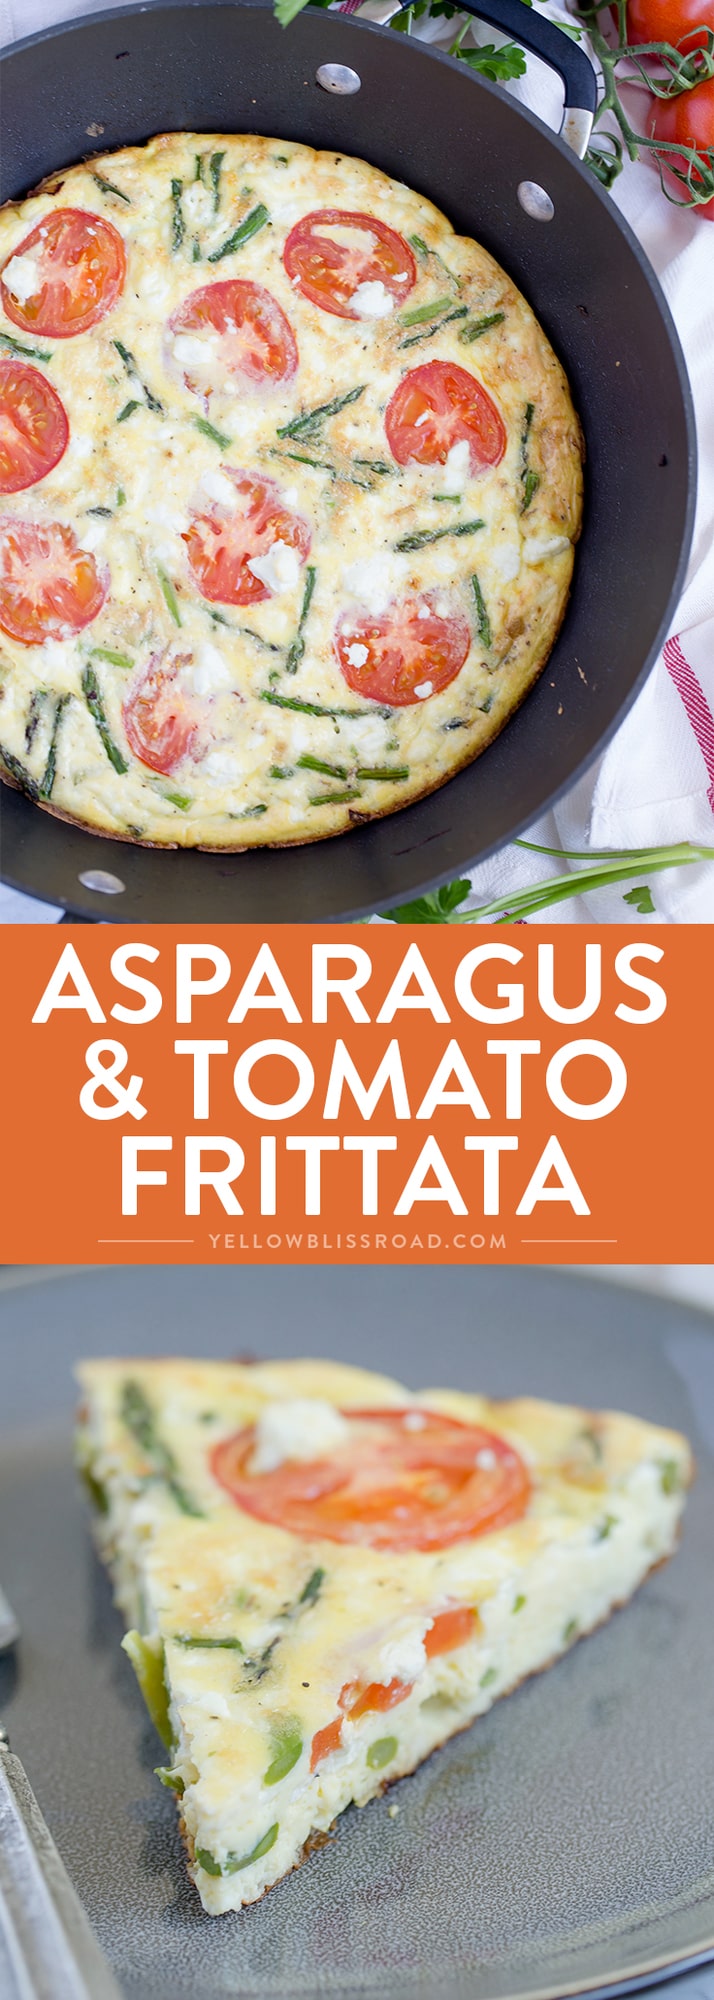 Asparagus, Tomato and Goat Cheese Frittata - Great for Brunch!